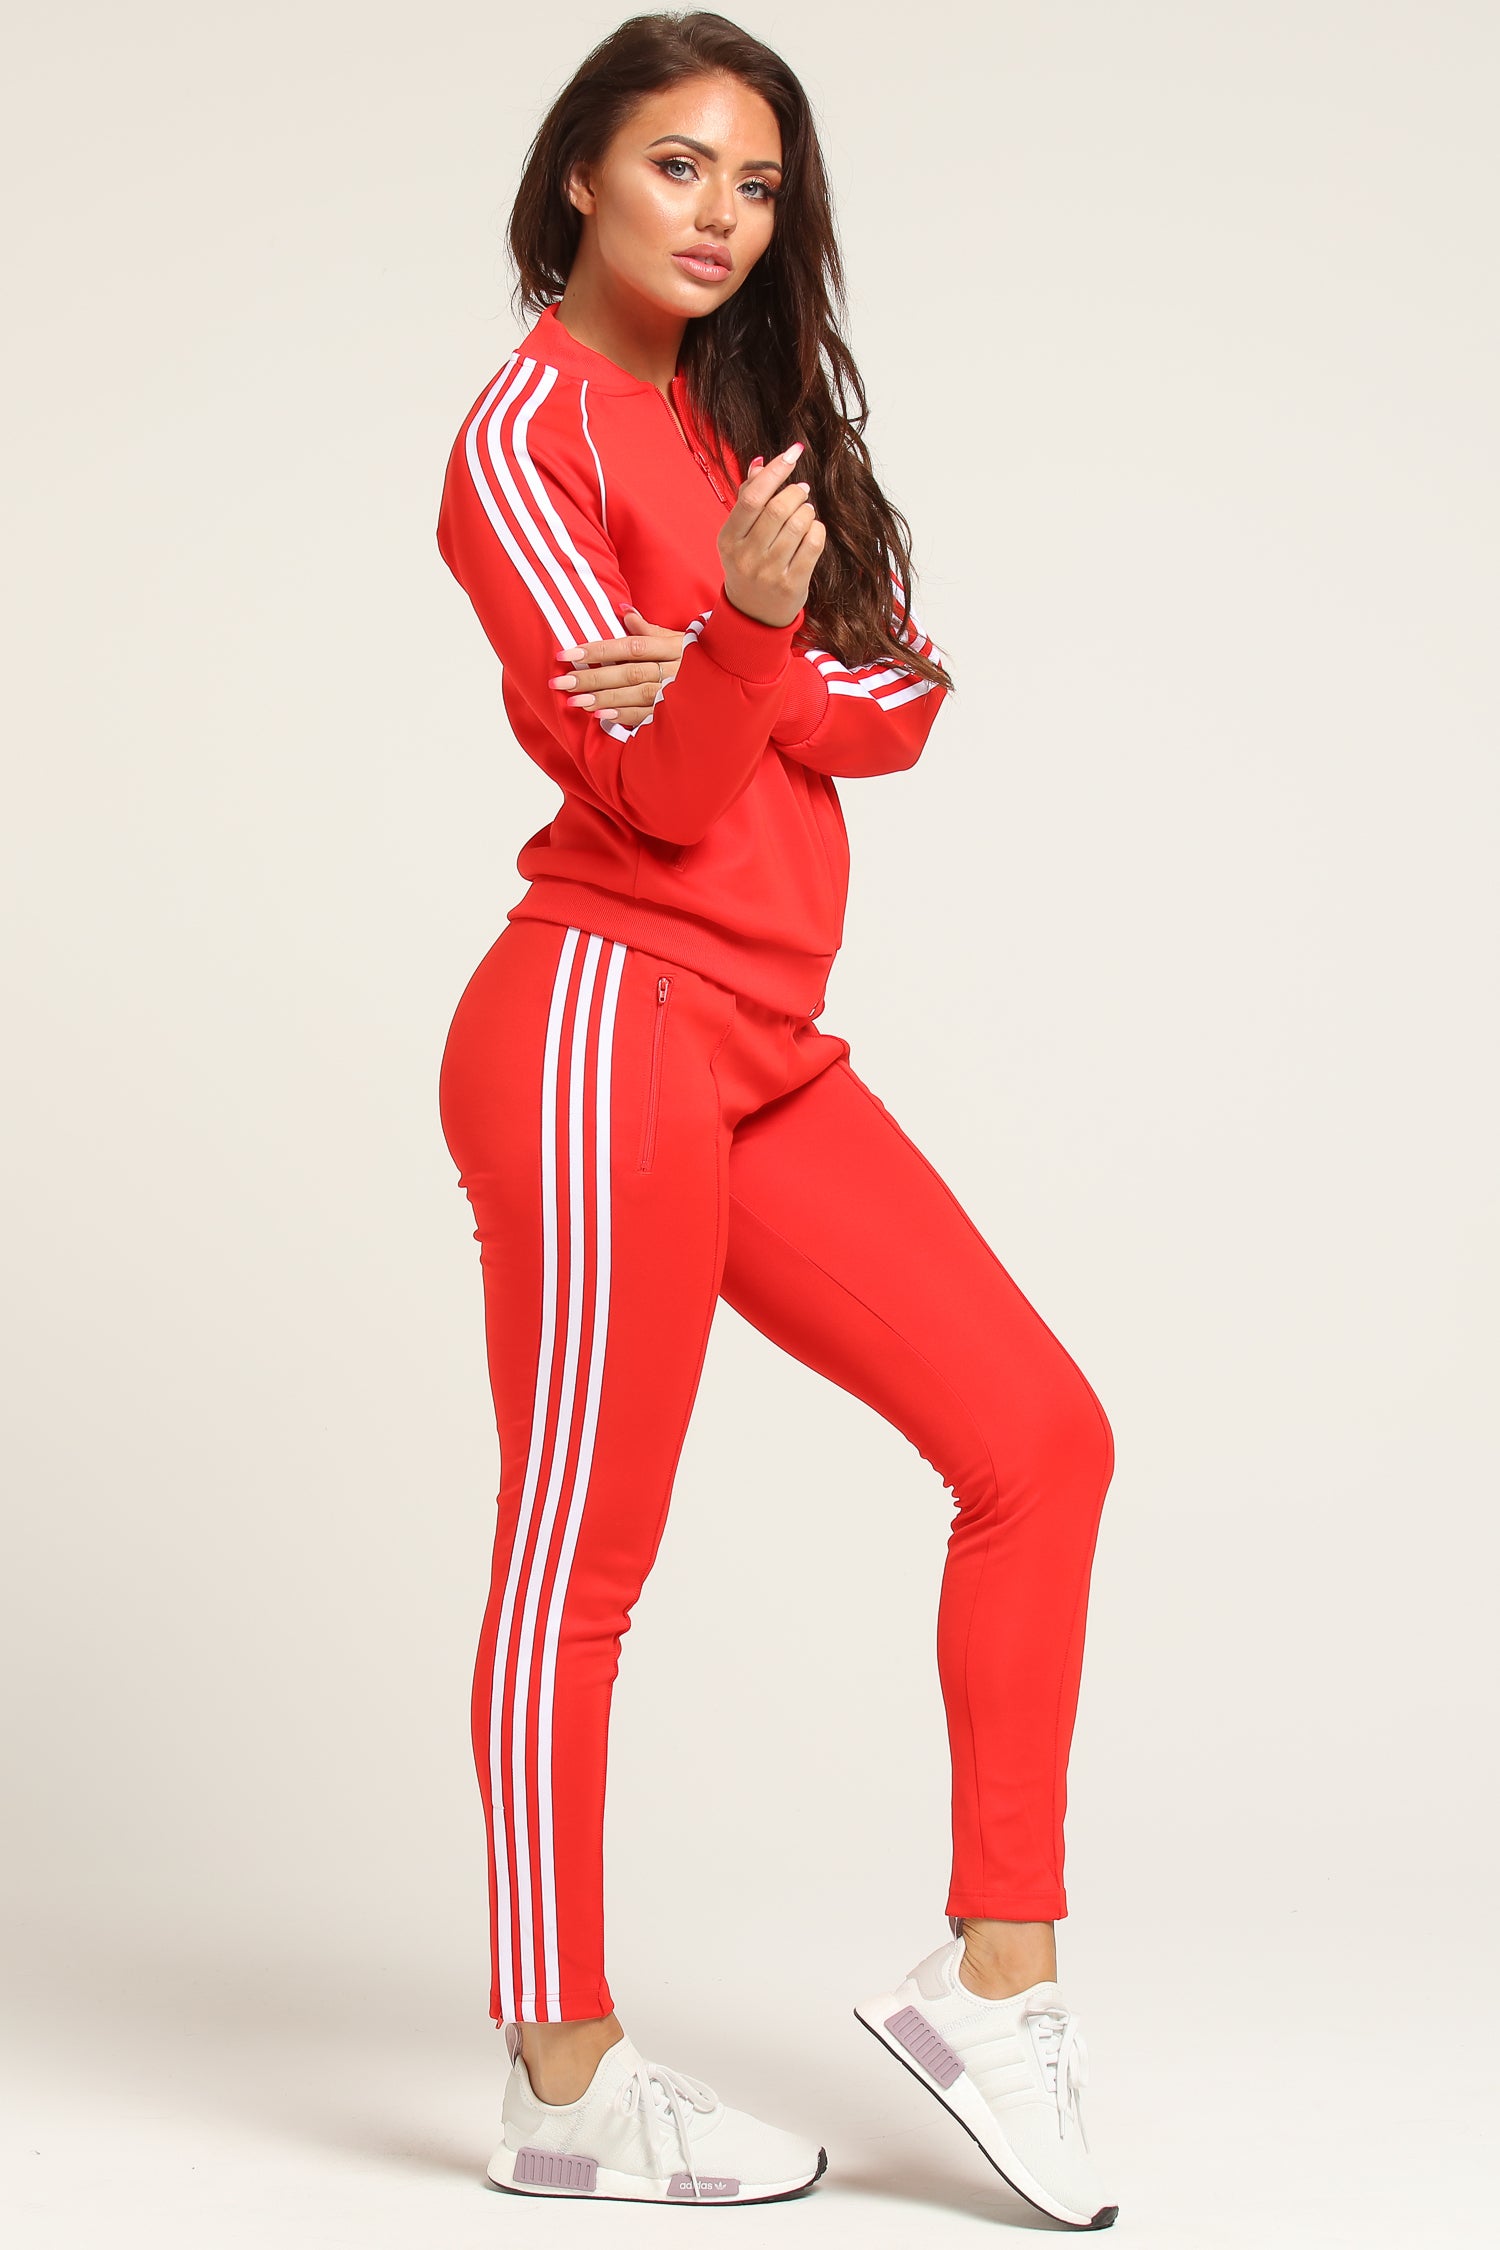 red adidas joggers women